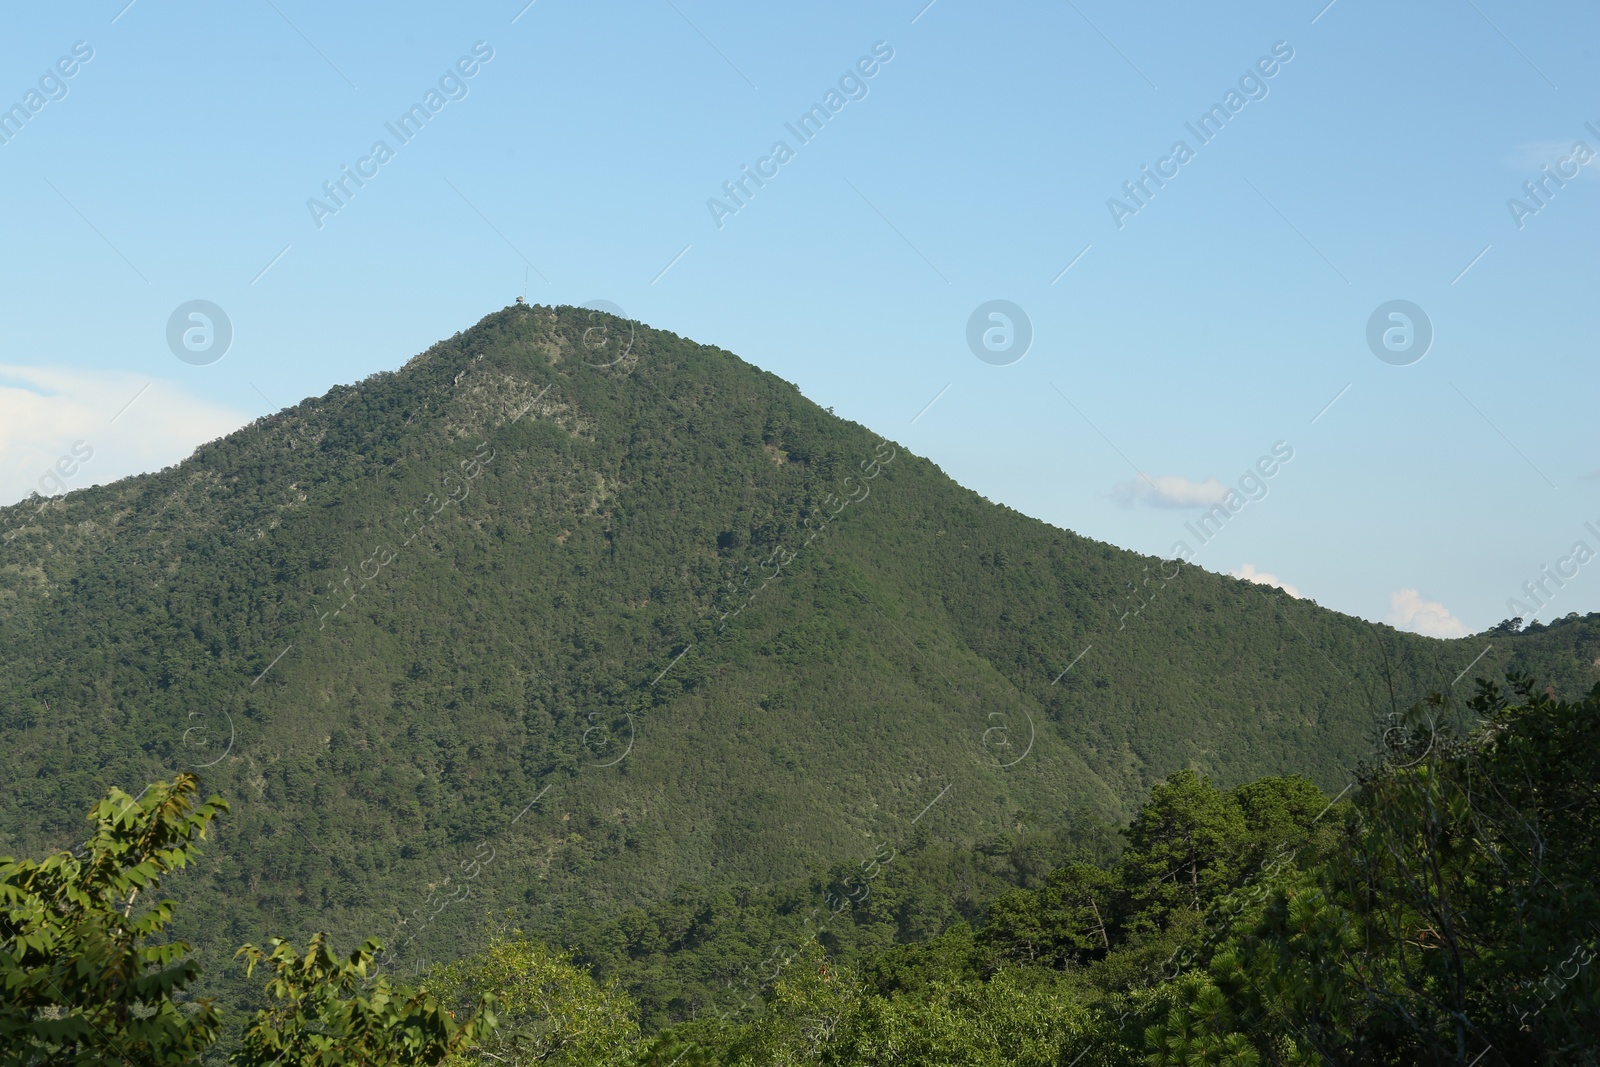 Photo of Picturesque view of big mountain and trees under blue sky